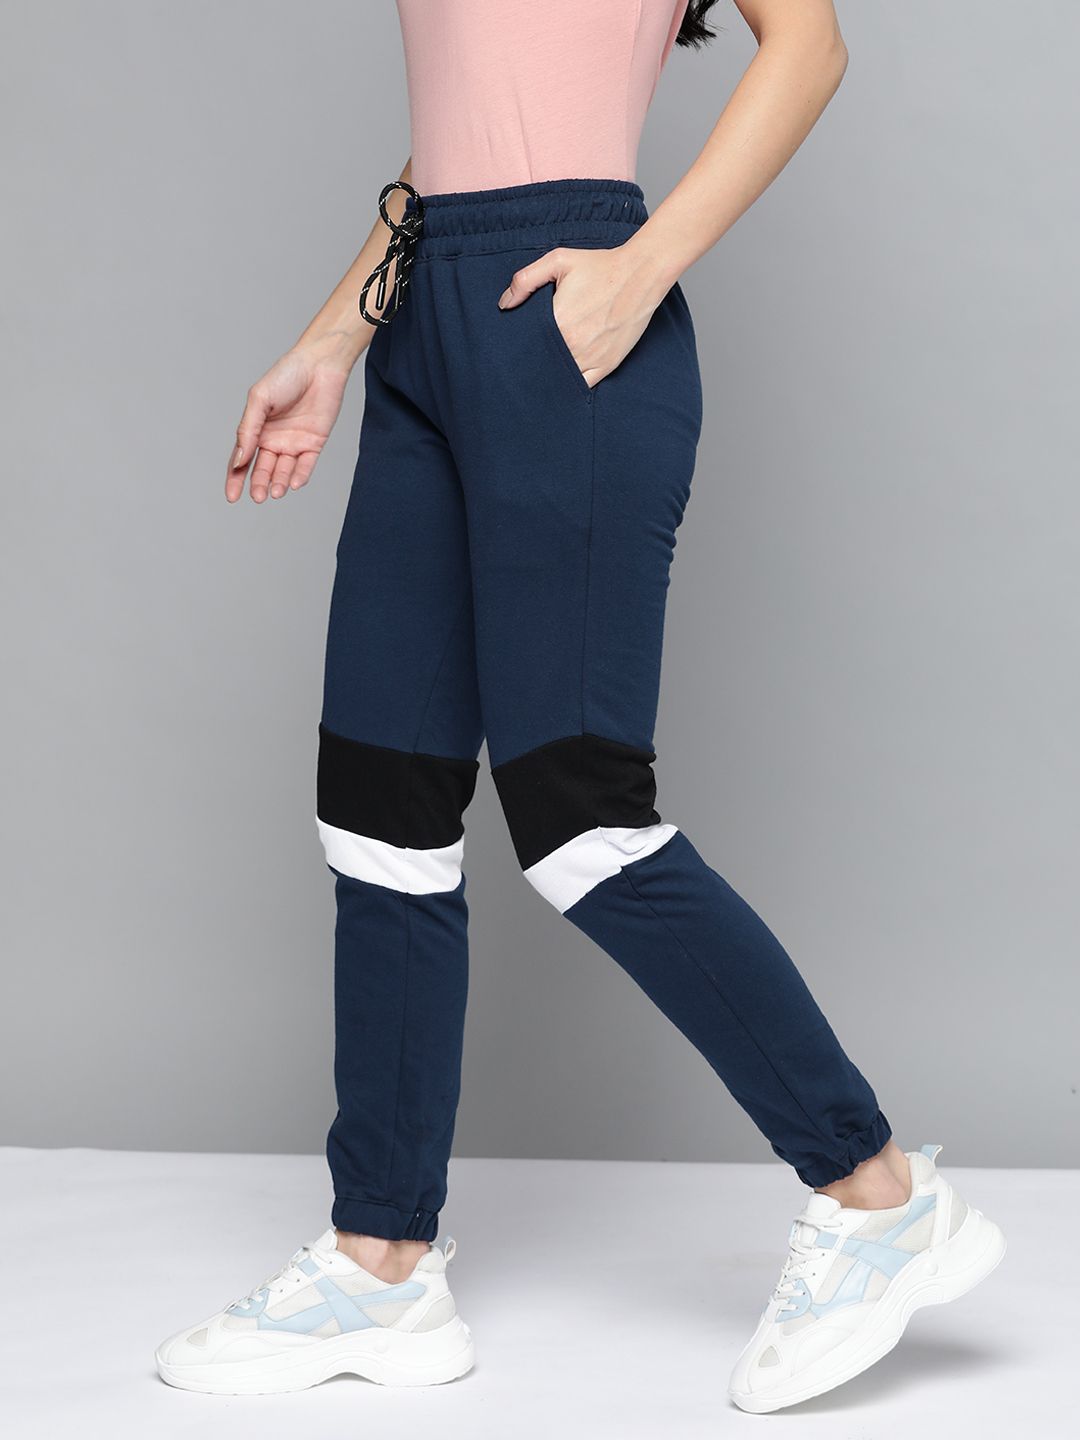 Harvard Women Navy Blue & Black Solid Joggers with Colourblocked Detail Price in India